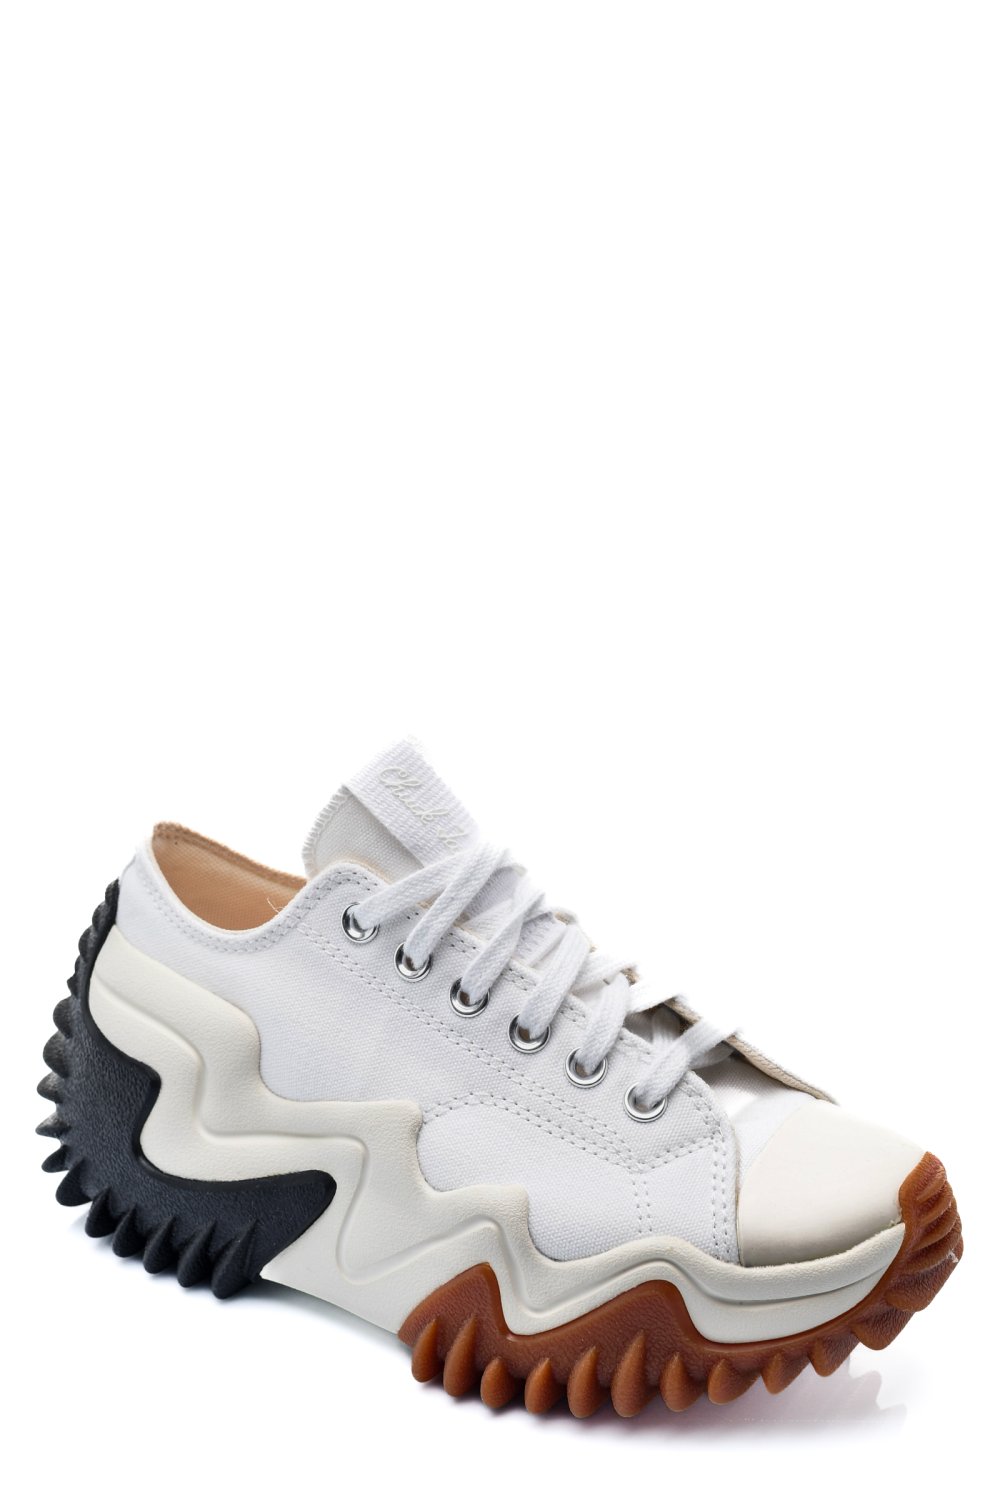 CONVERSE, SNEAKERS WHITE RUN STAR MOTION OX